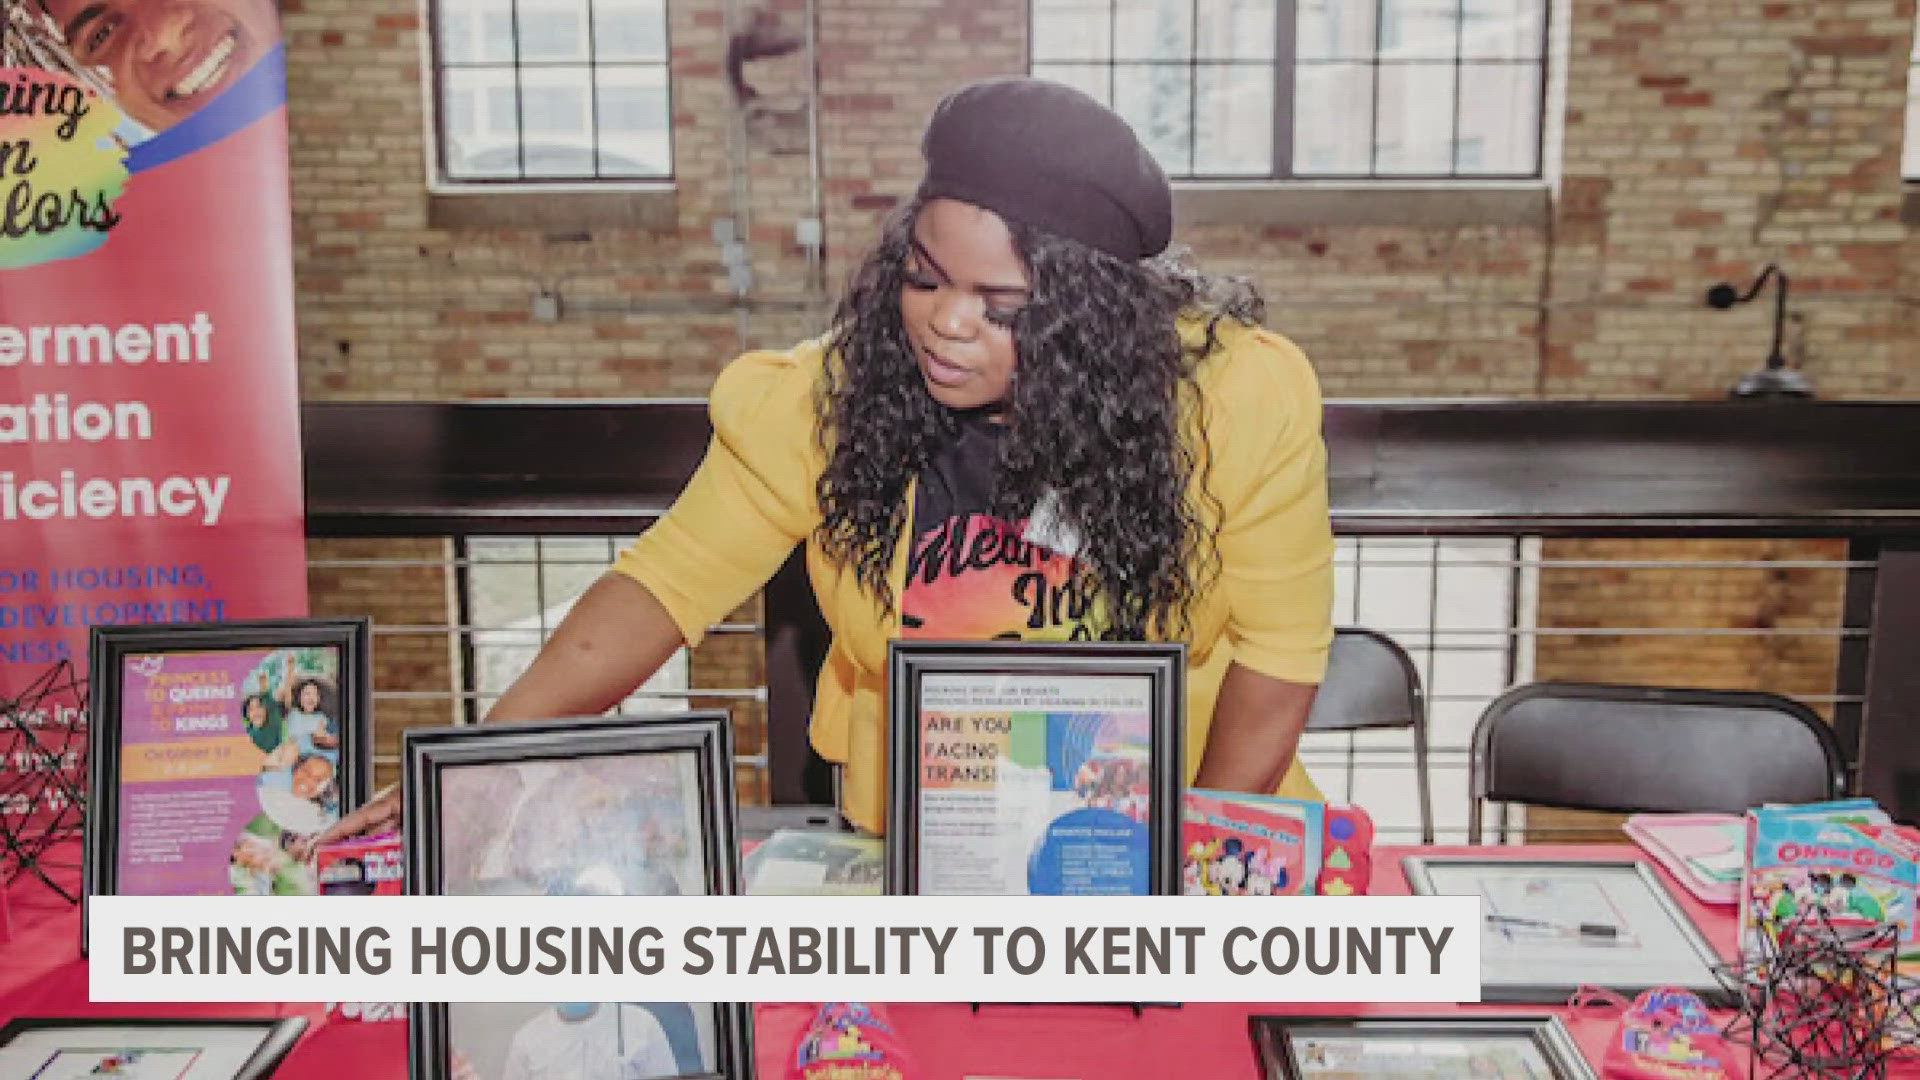 Housing Kent's research shows the homeownership rate for white residents in Kent County is 76%. For Black residents, it's 34%.